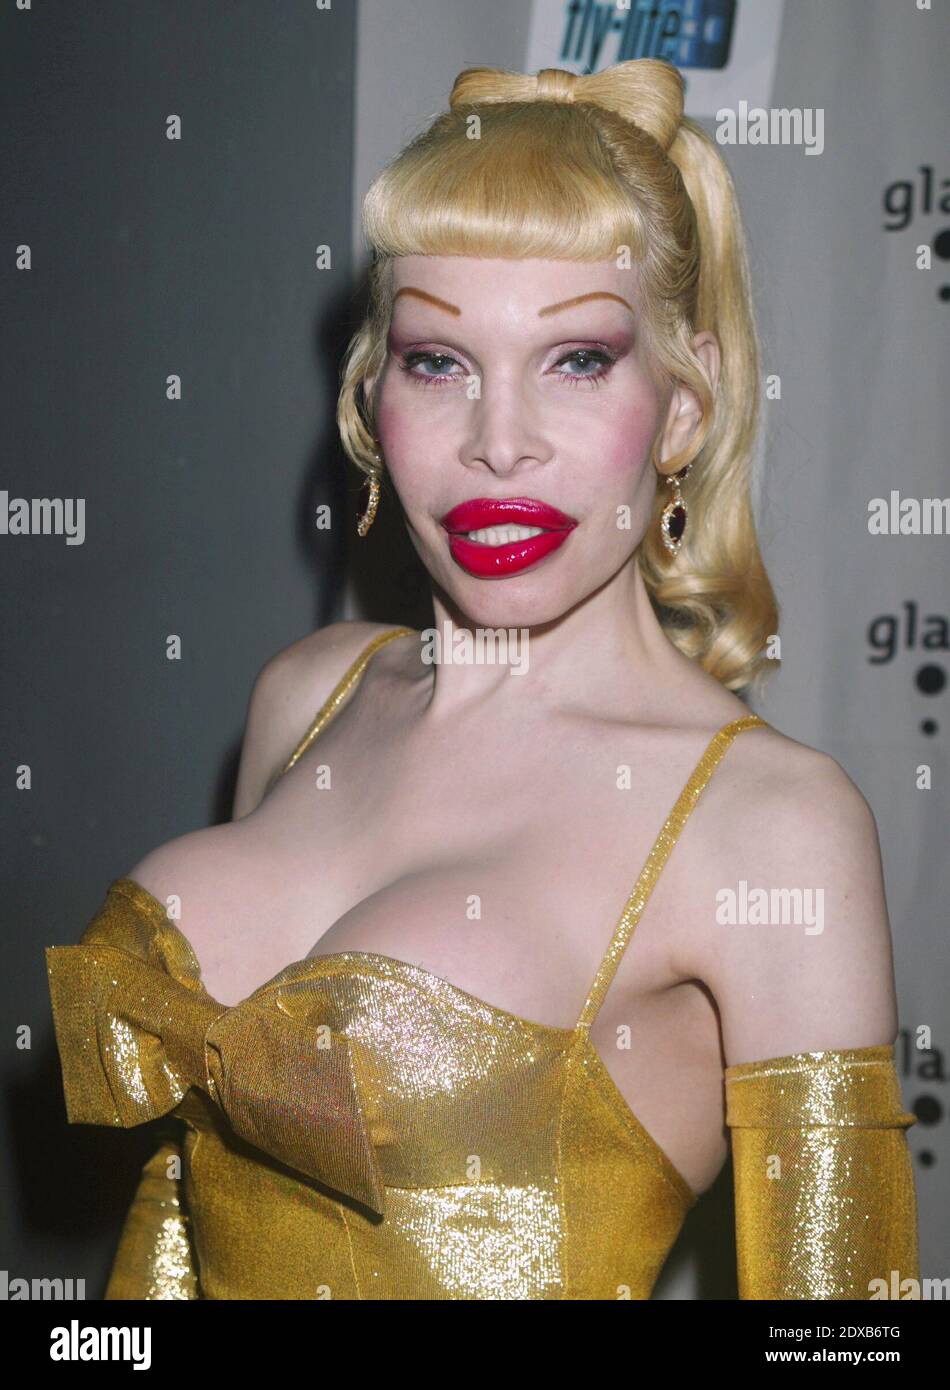 Amanda Lepore at "The Real Thing" benefit for GLAAD at The Roxy in New York City on May 8, 2003.  Photo Credit: Henry McGee/MediaPunch Stock Photo